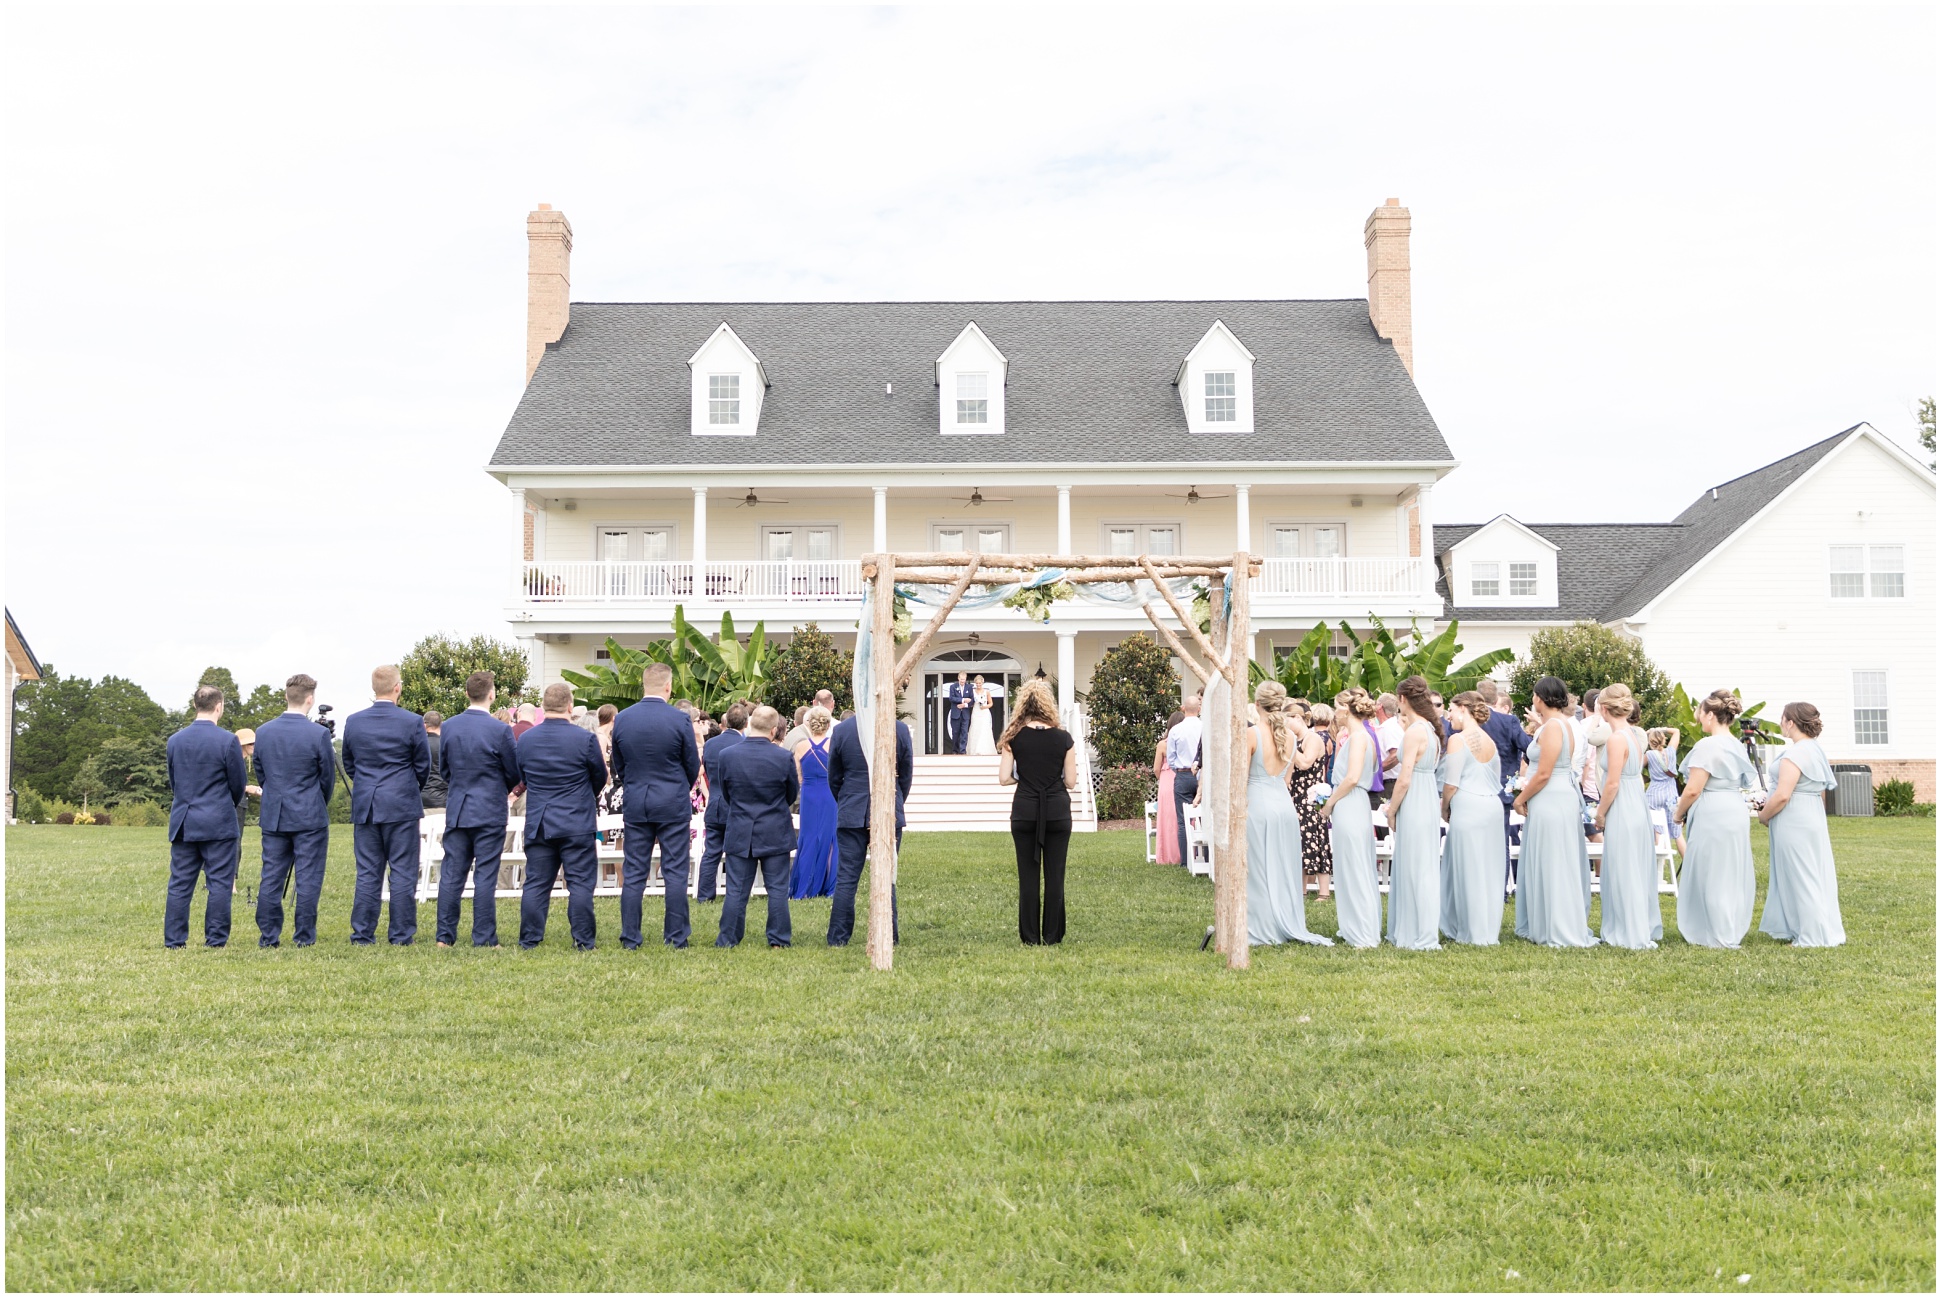 Entire ceremony image at weatherly farm